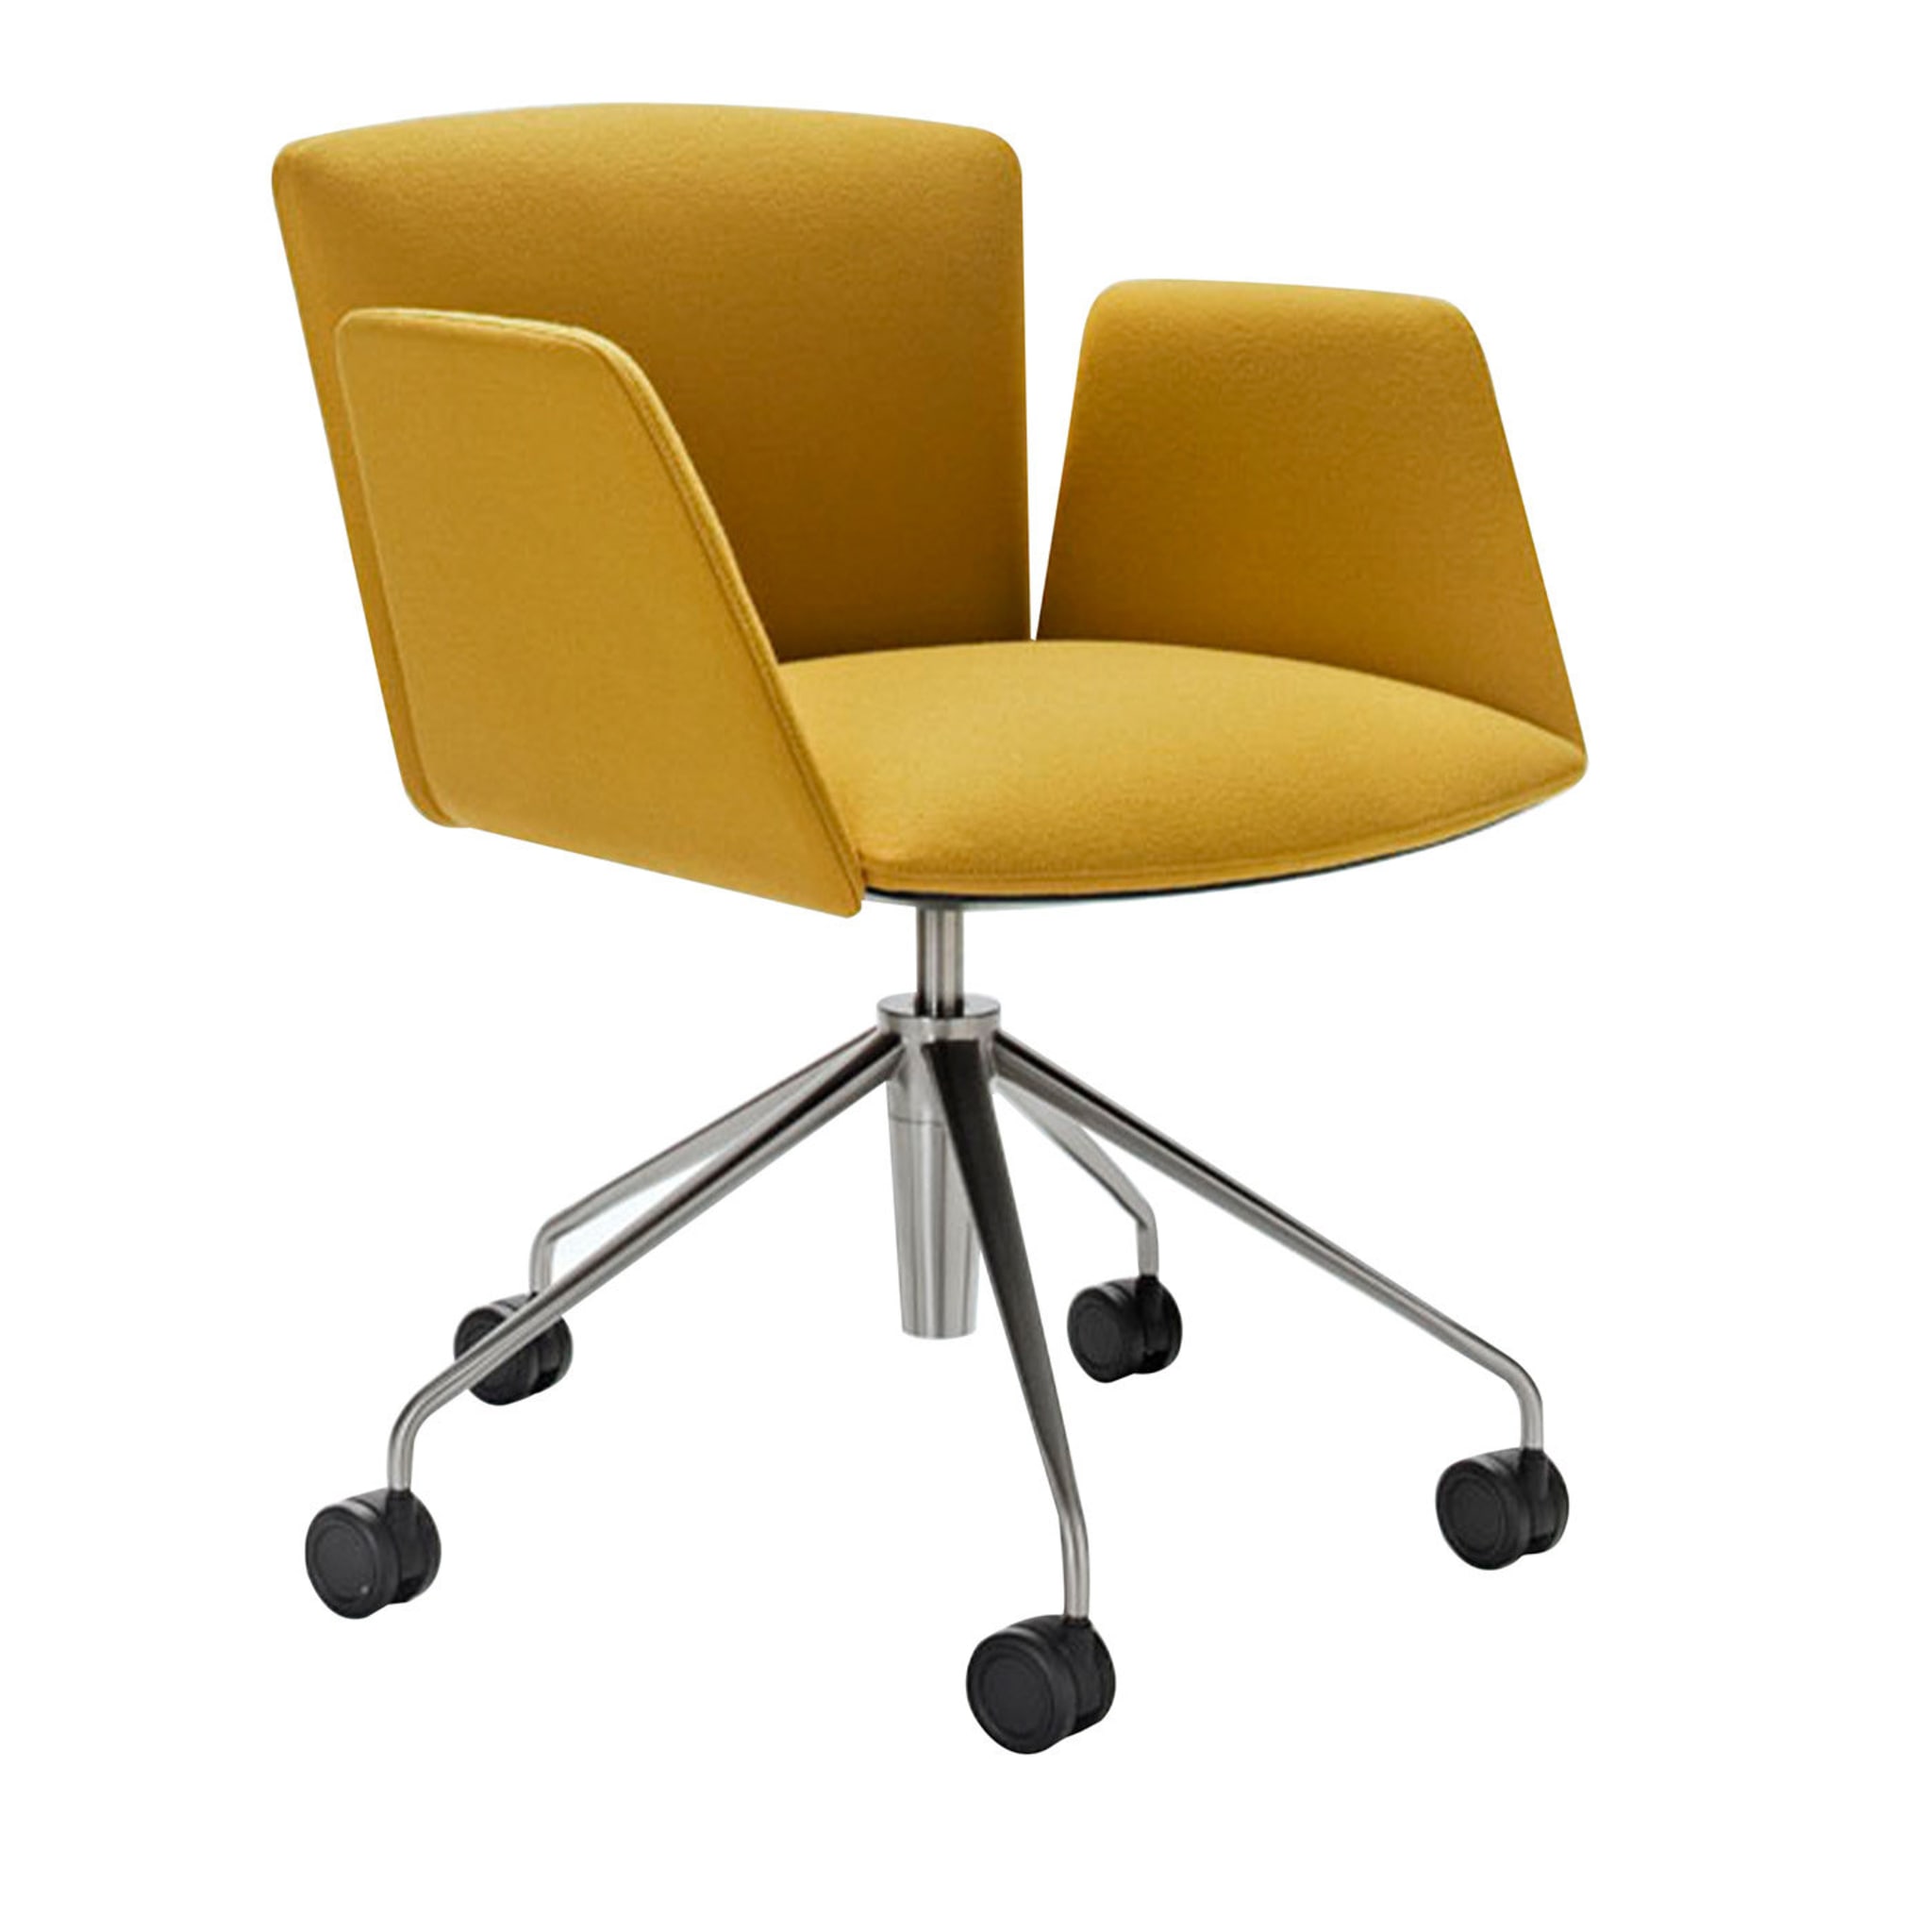 Vela Mustard Swivel Armchair by Lievore Altherr Molina - Main view